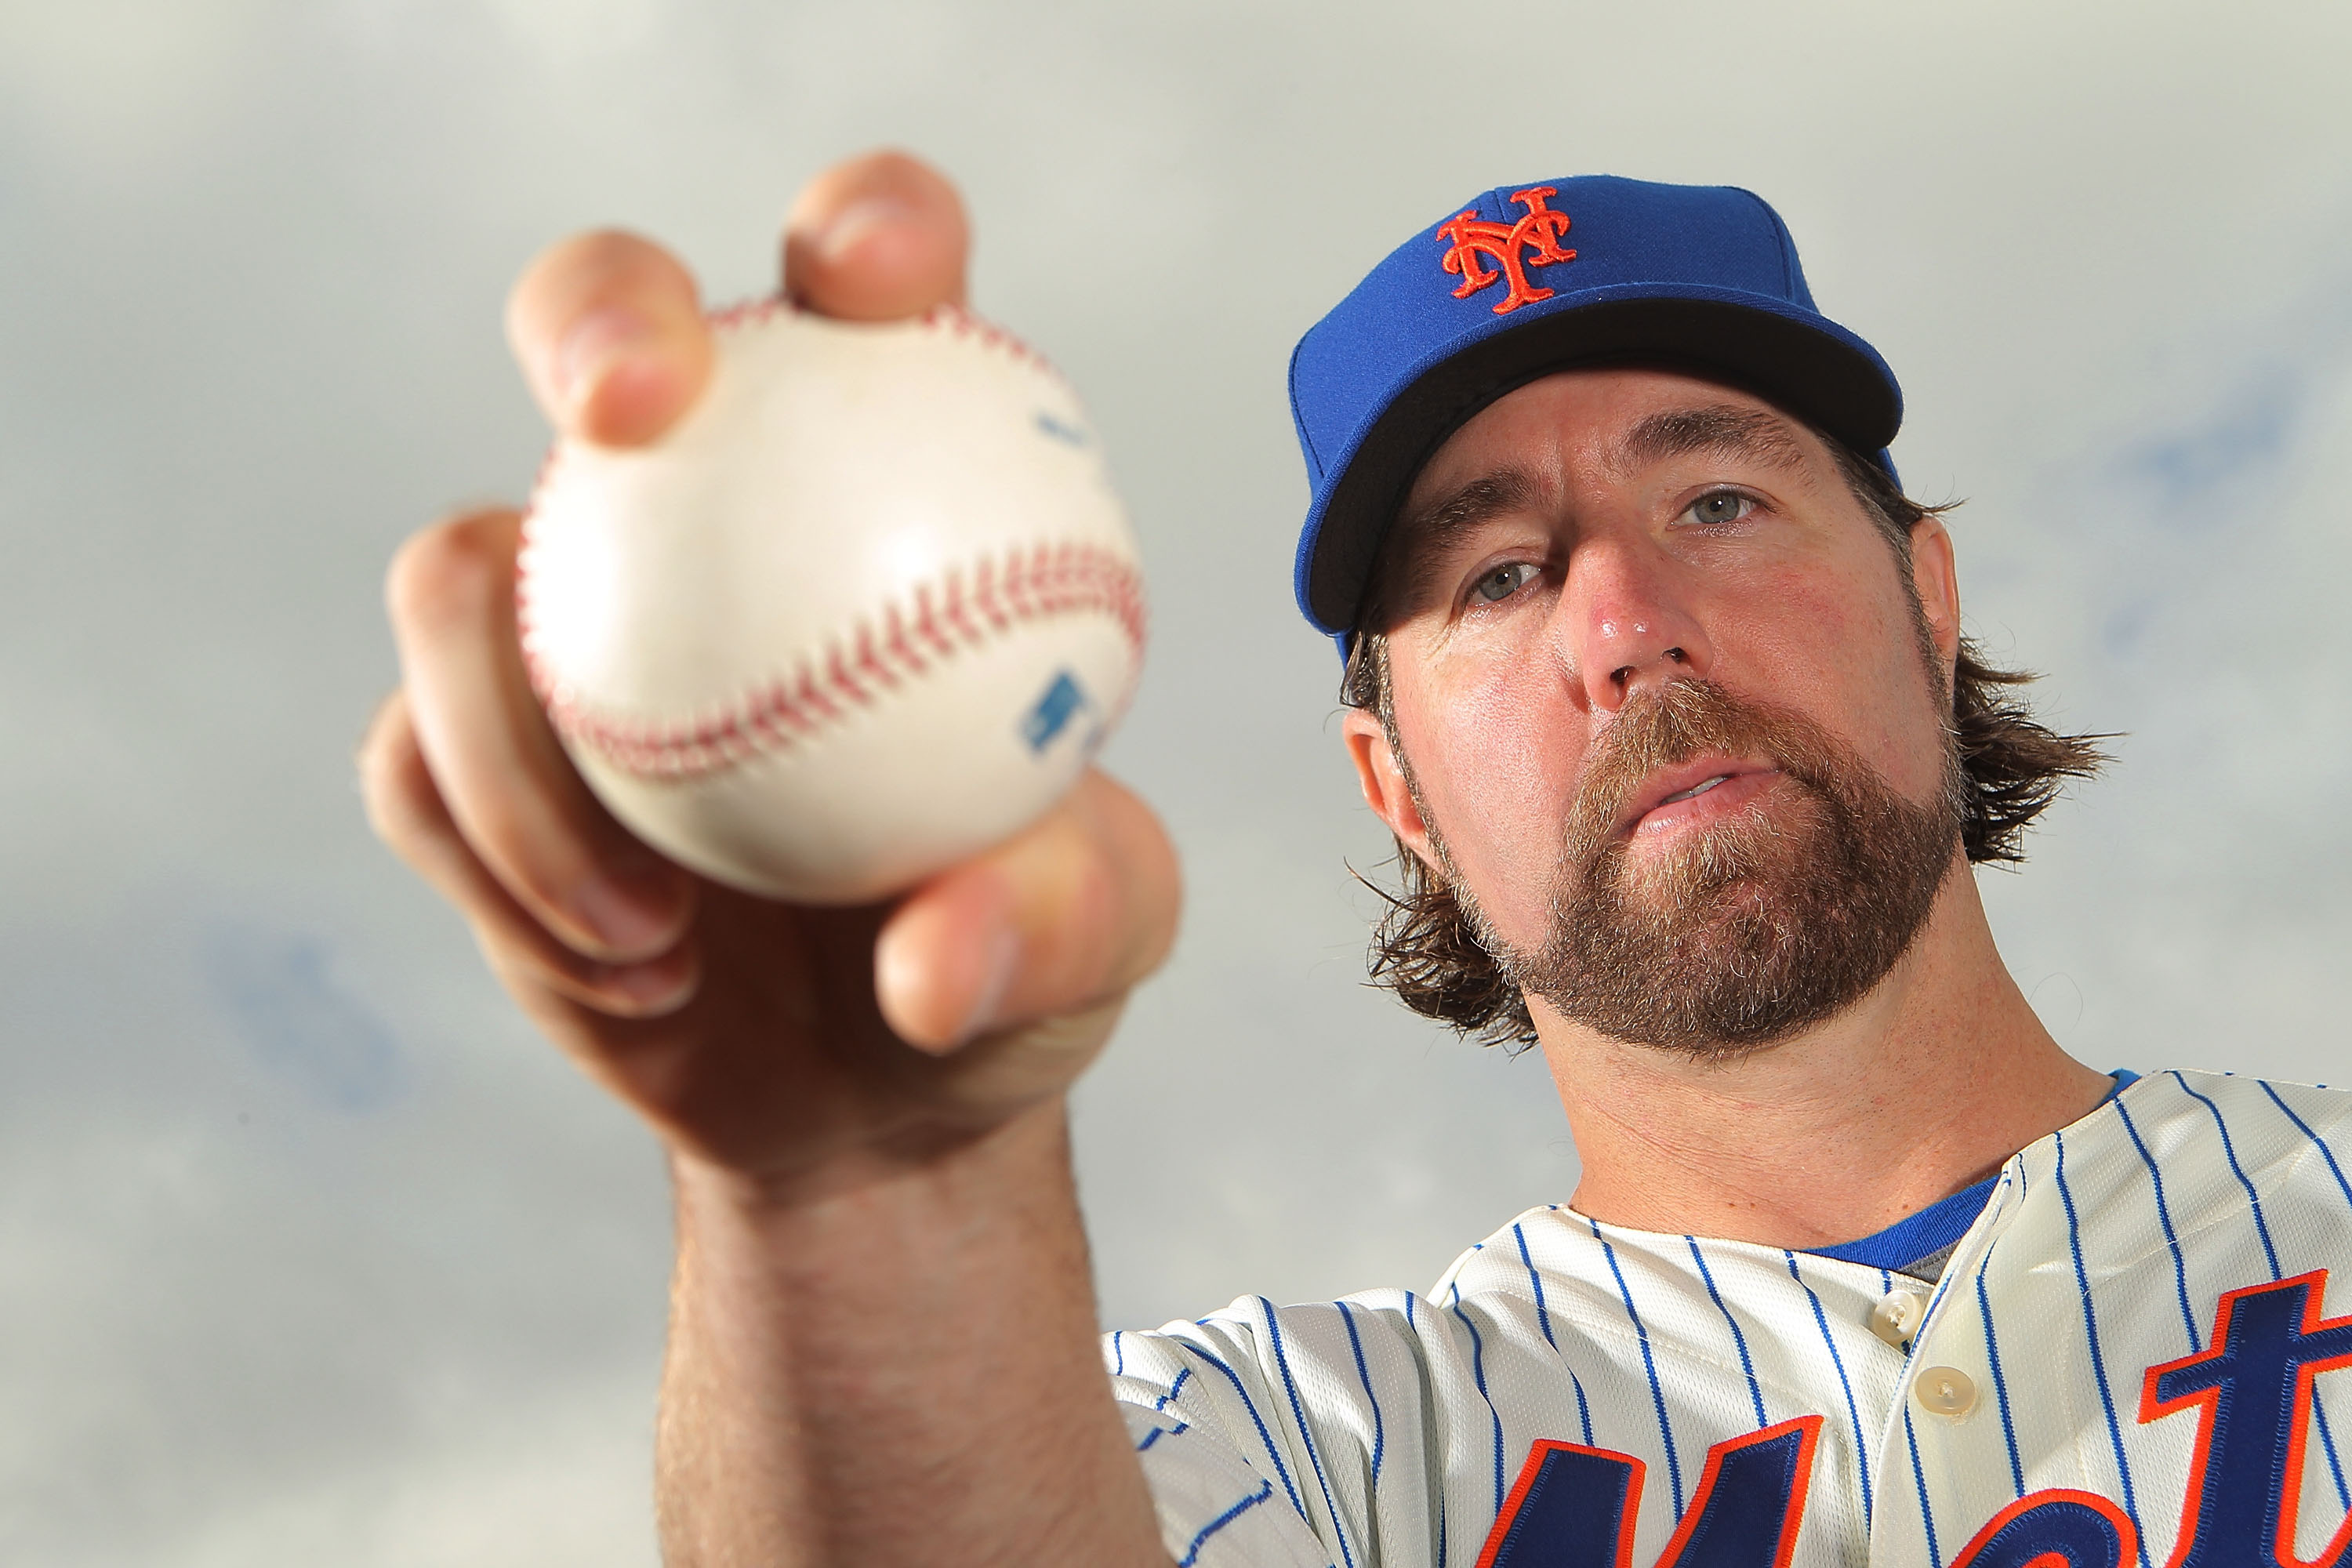 OKC RedHawks: Mets ace R.A. Dickey wanted more than being a